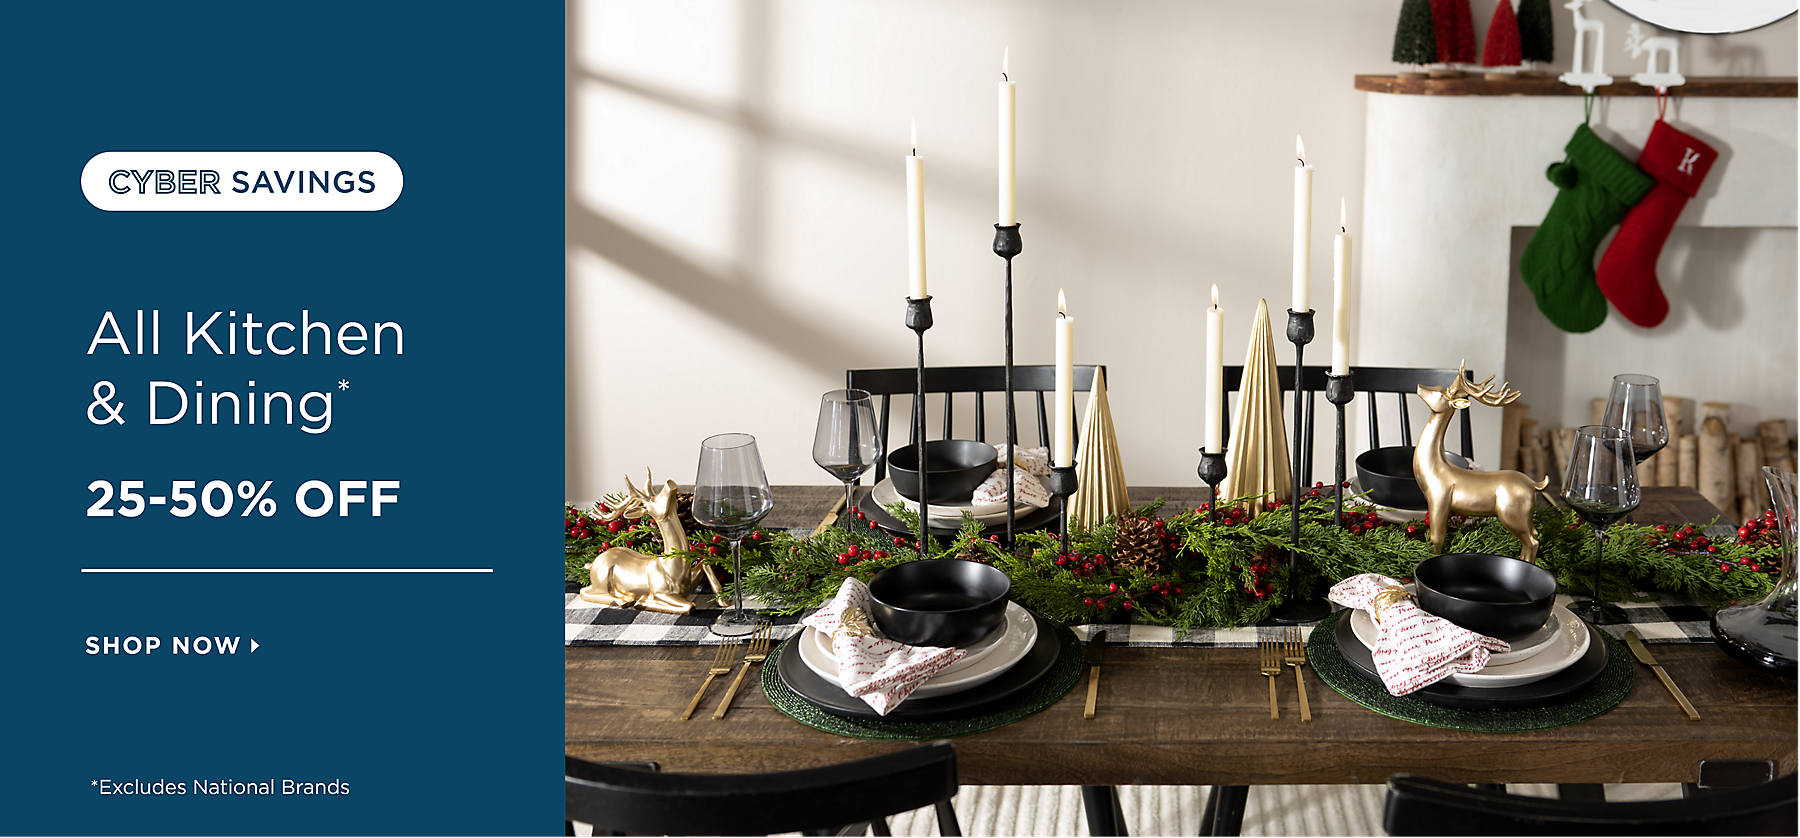 All Kitchen & Dining* 25-50% Off Shop Now *Excludes National Brands Cyber Savings